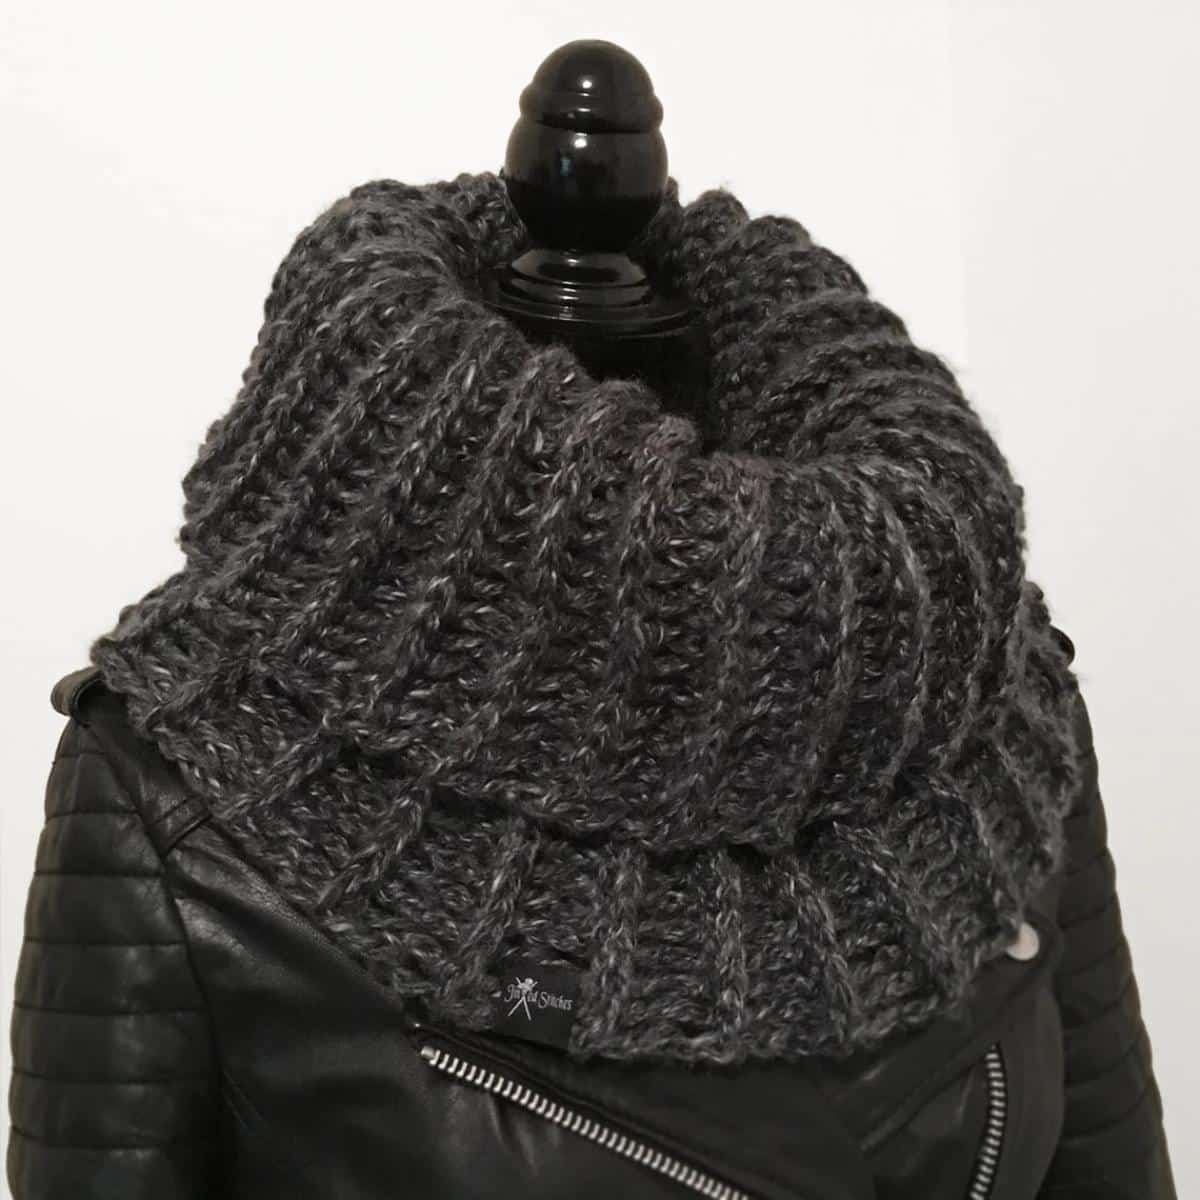 Simple Ribbed Cowl Scarf With Chunky Yarn